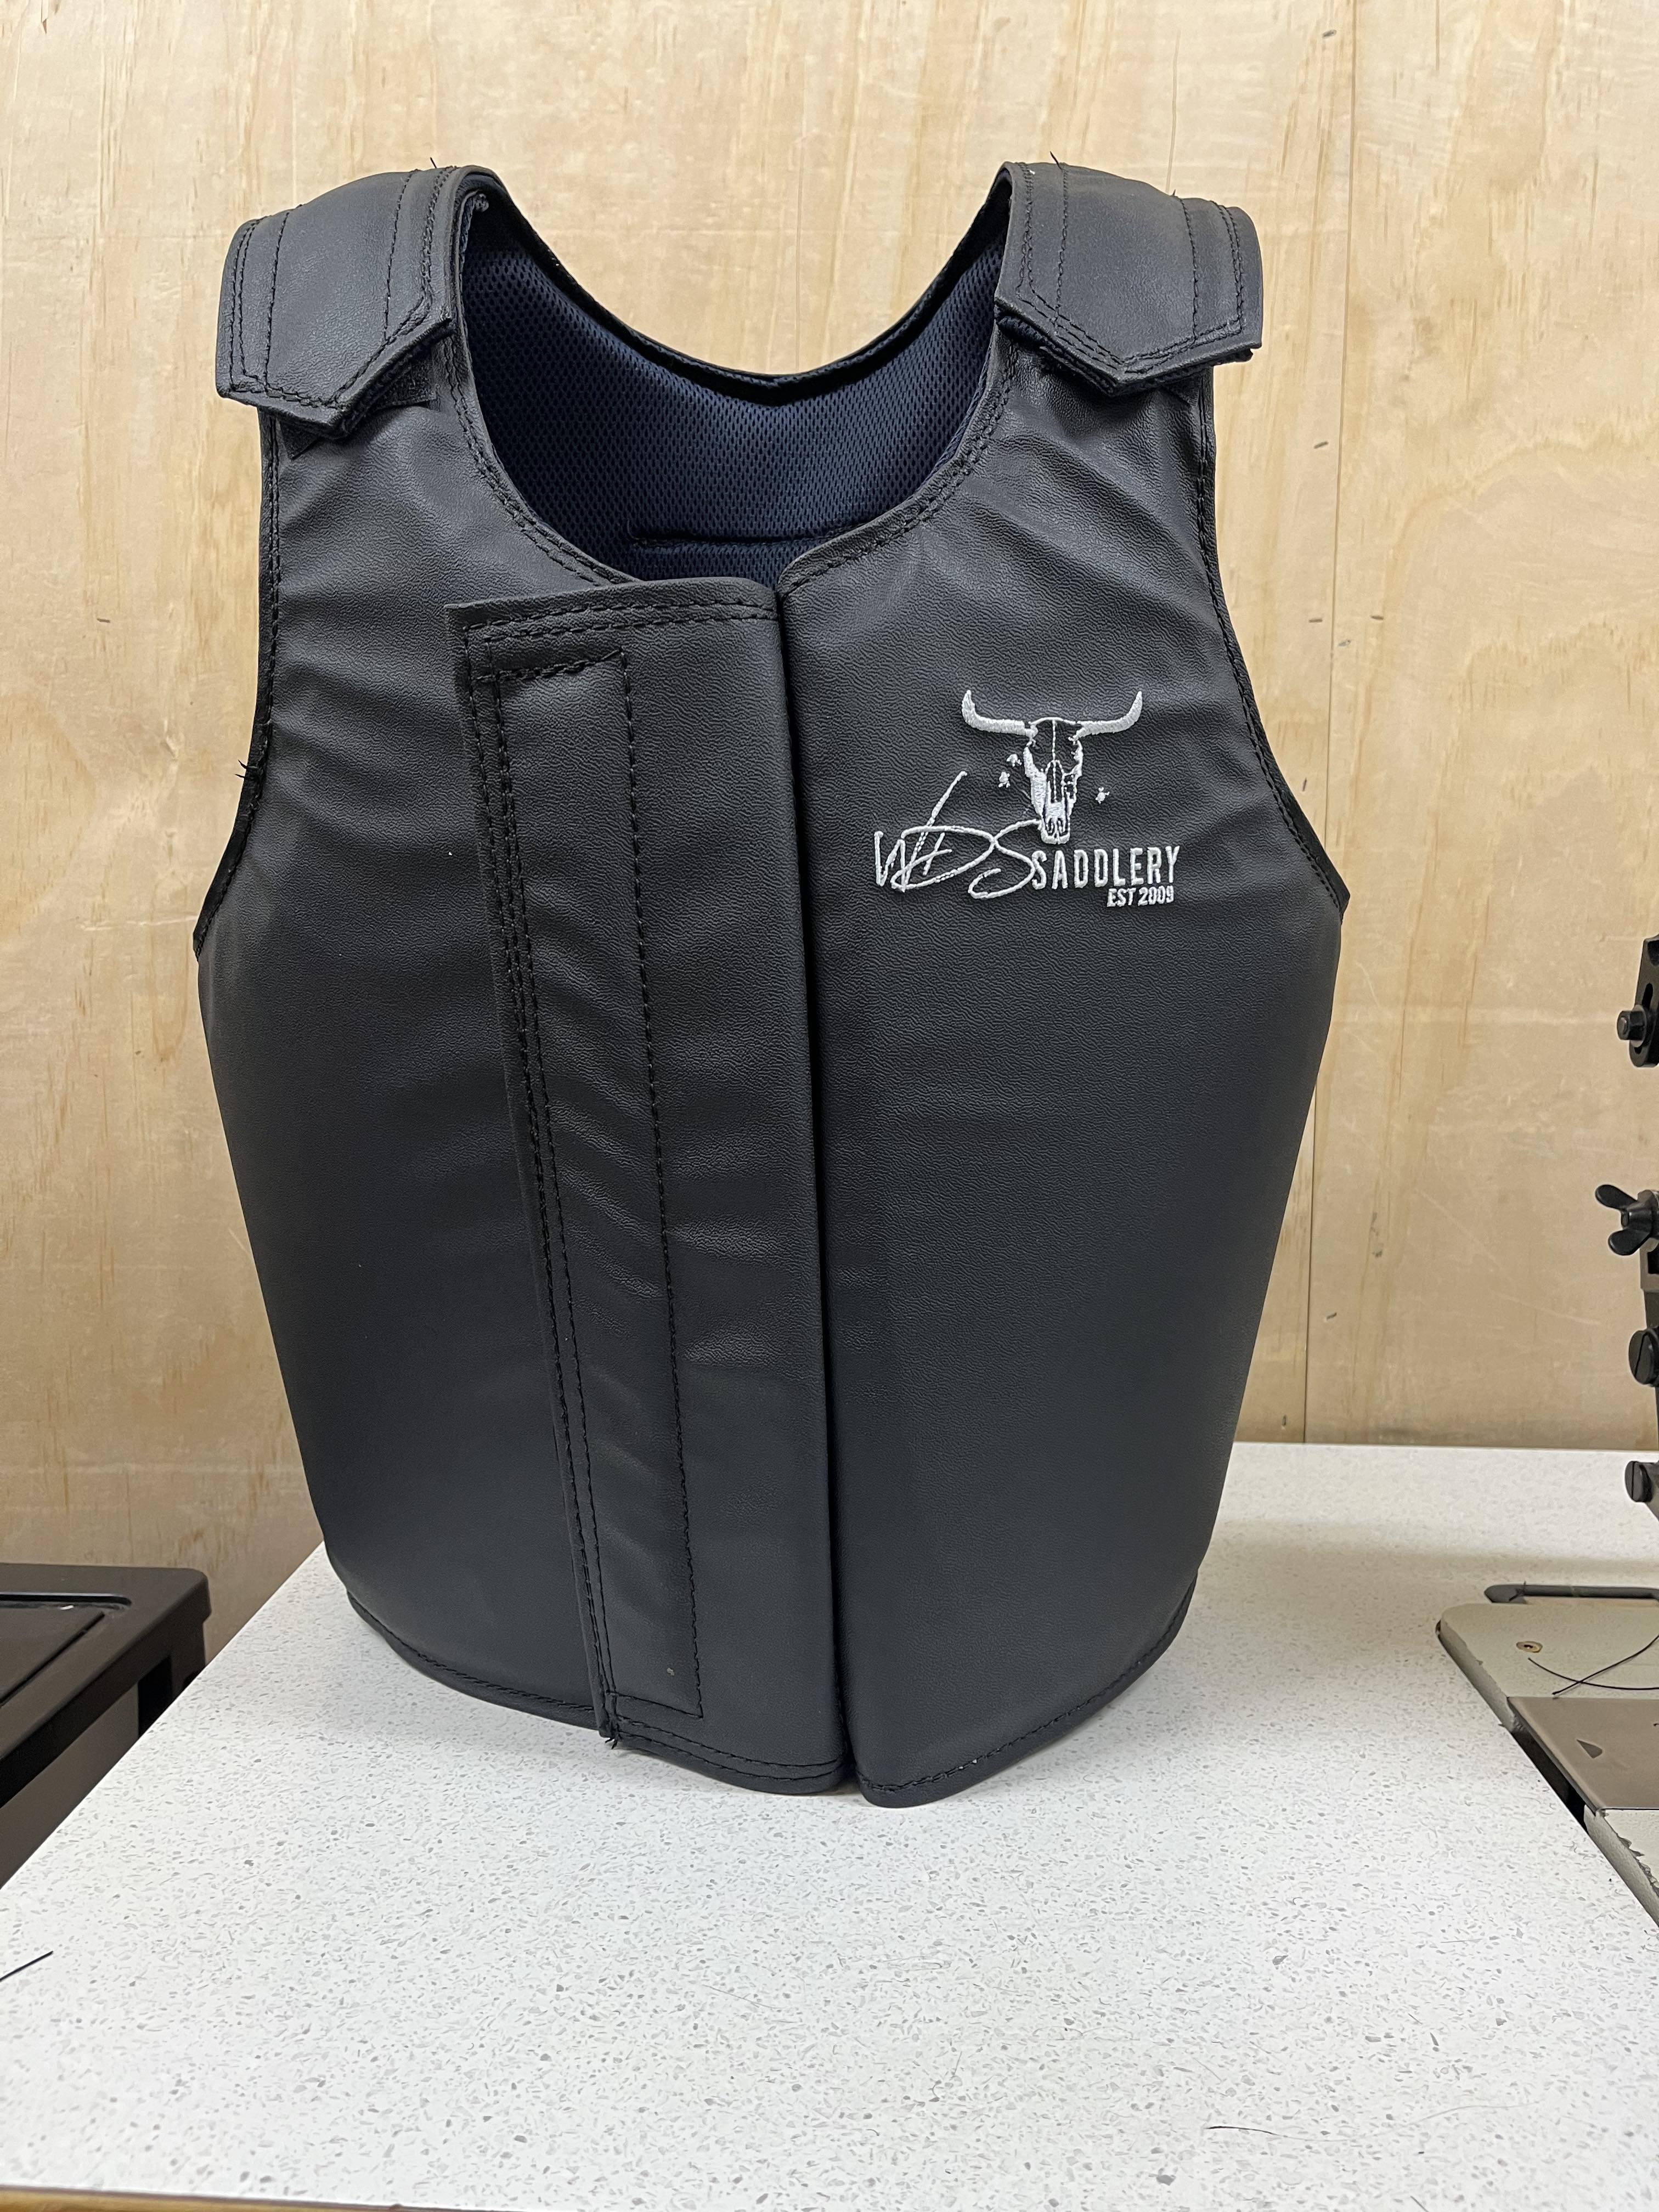 WDS Saddlery Pro Rodeo Vest - Silver Adult Medium - Ready made to be shipped